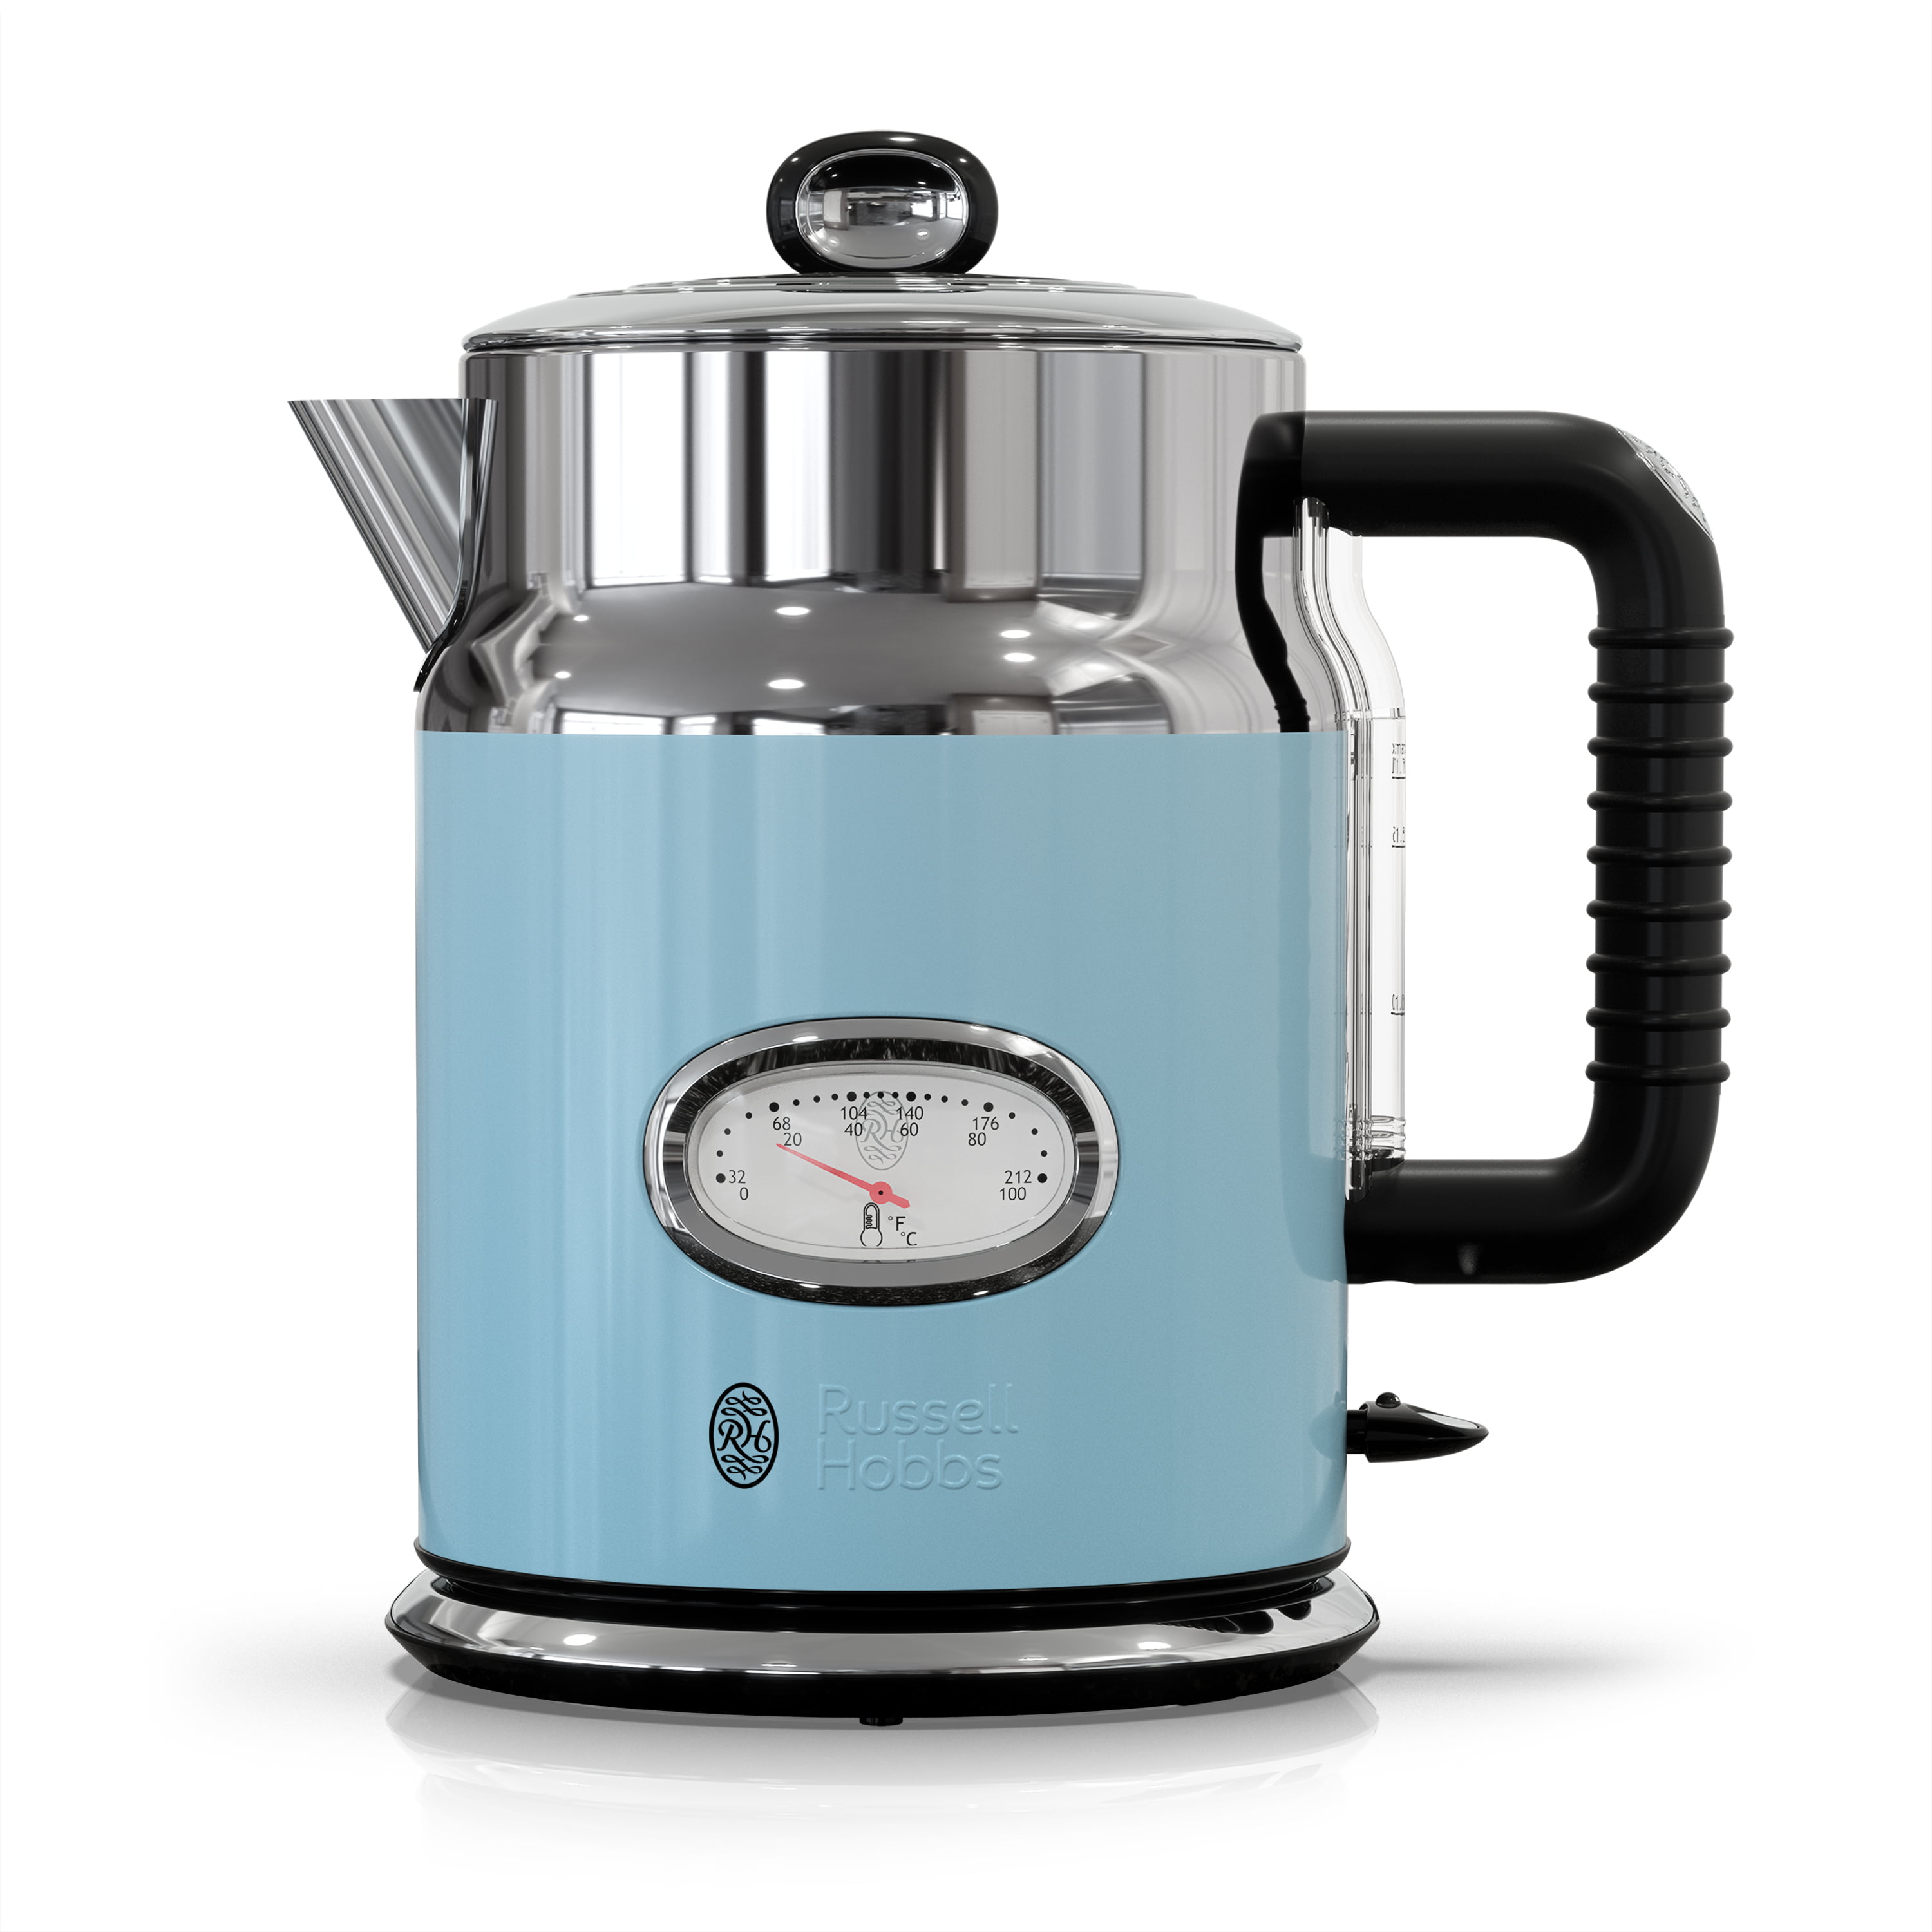 Russell Hobbs Heritage Country Kettle Cream – Yappee